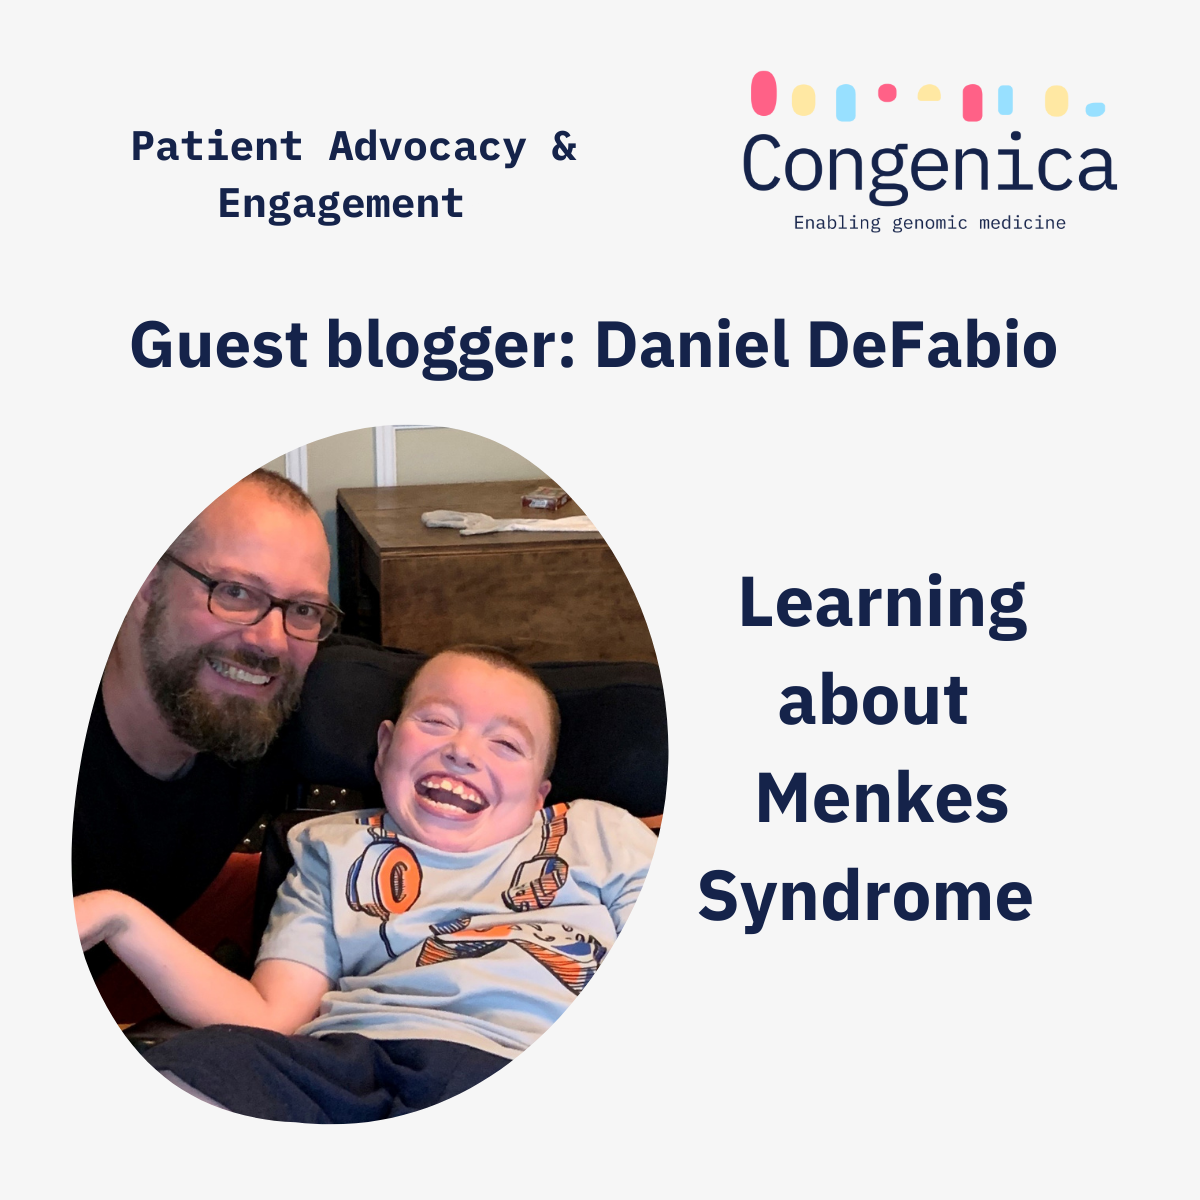 How we learnt about Menkes Syndrome